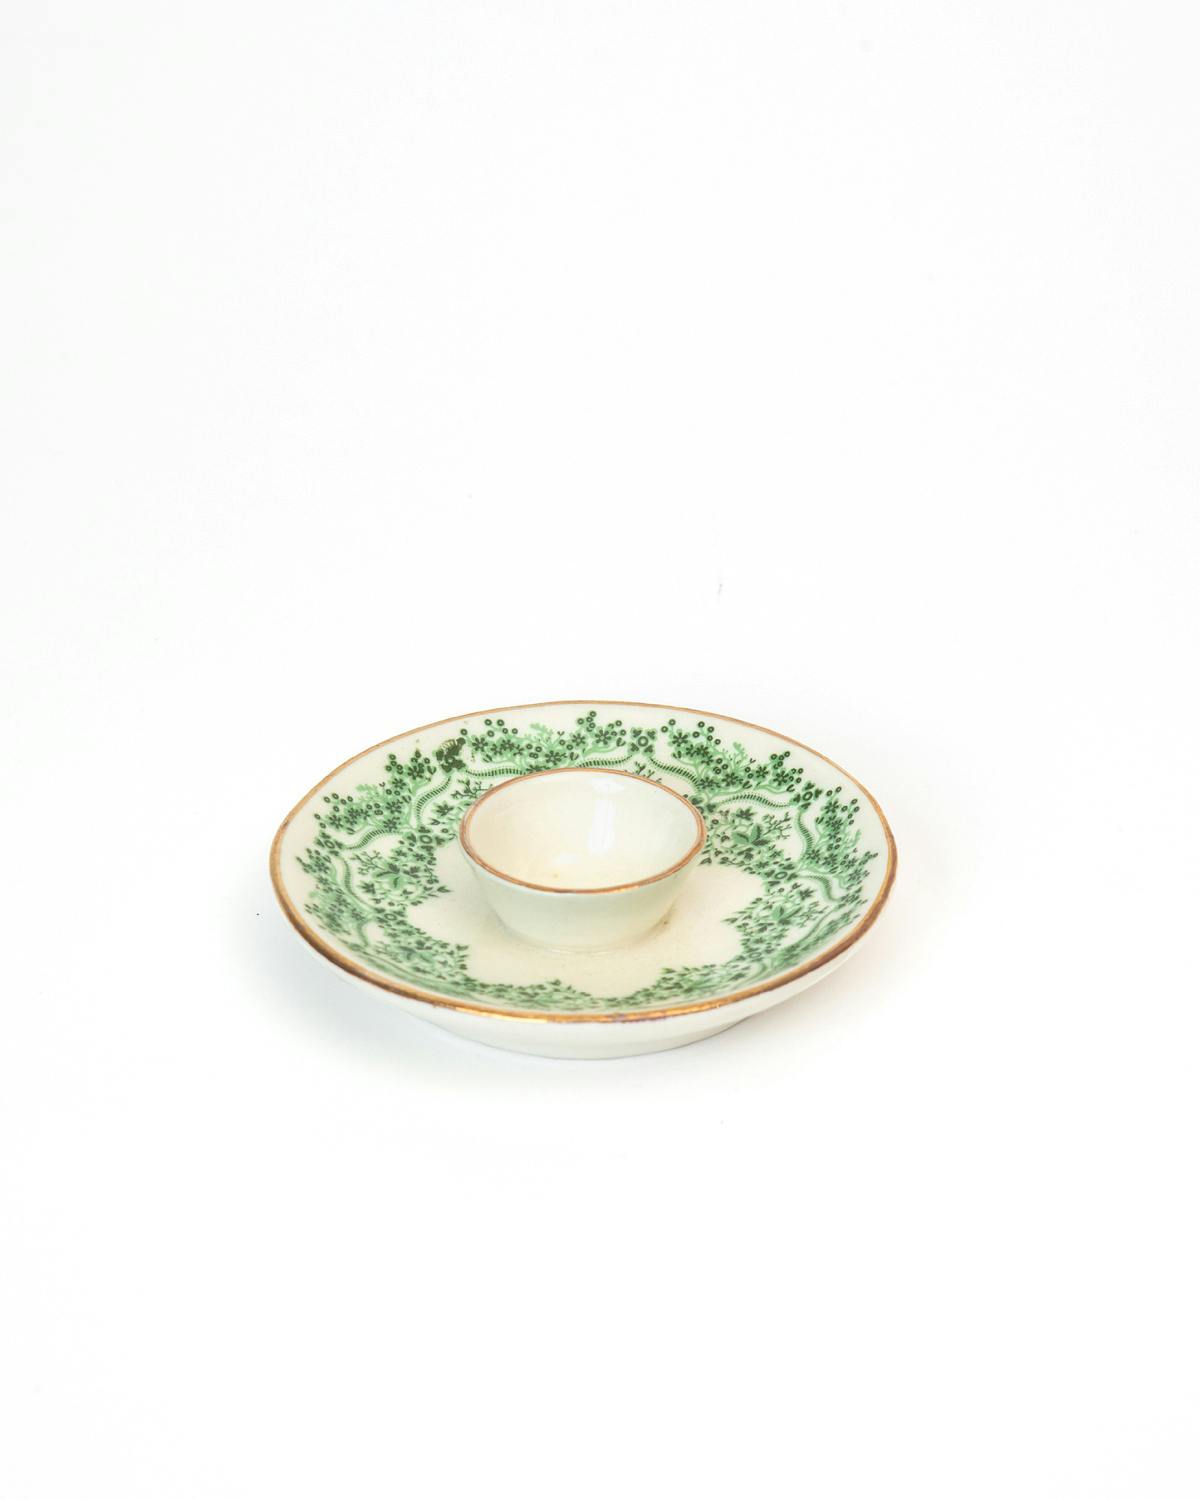 Egg Glass, Green Lace. Image #4